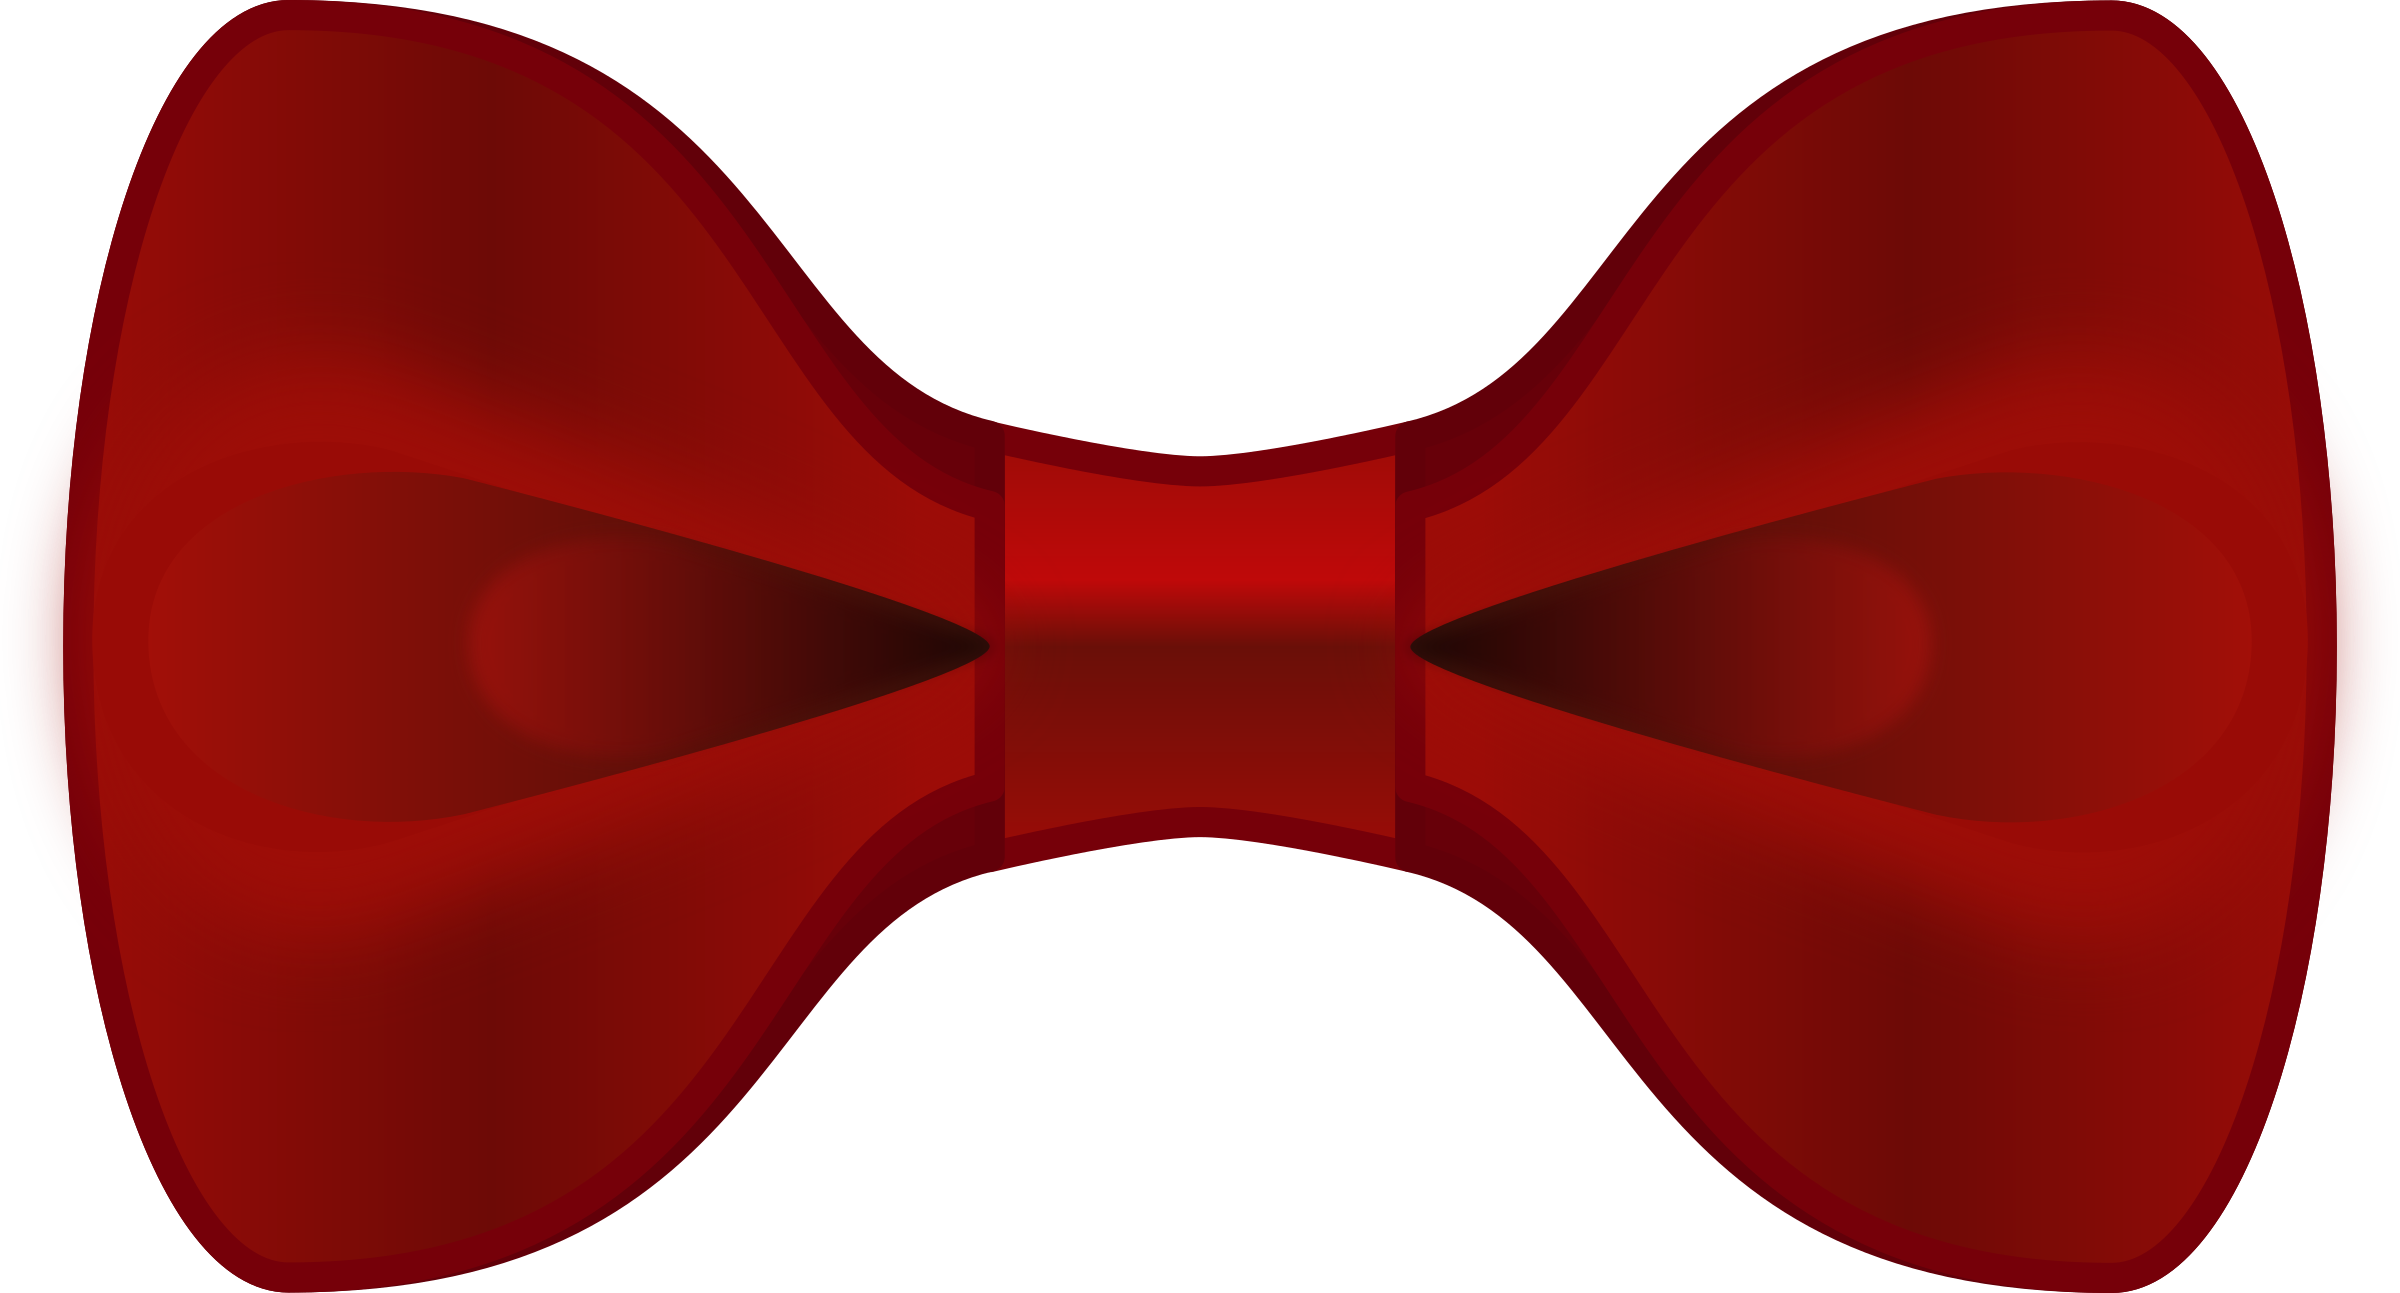 Bow Tie Clipart Bow Tie Transparent Png Images Free Download Free